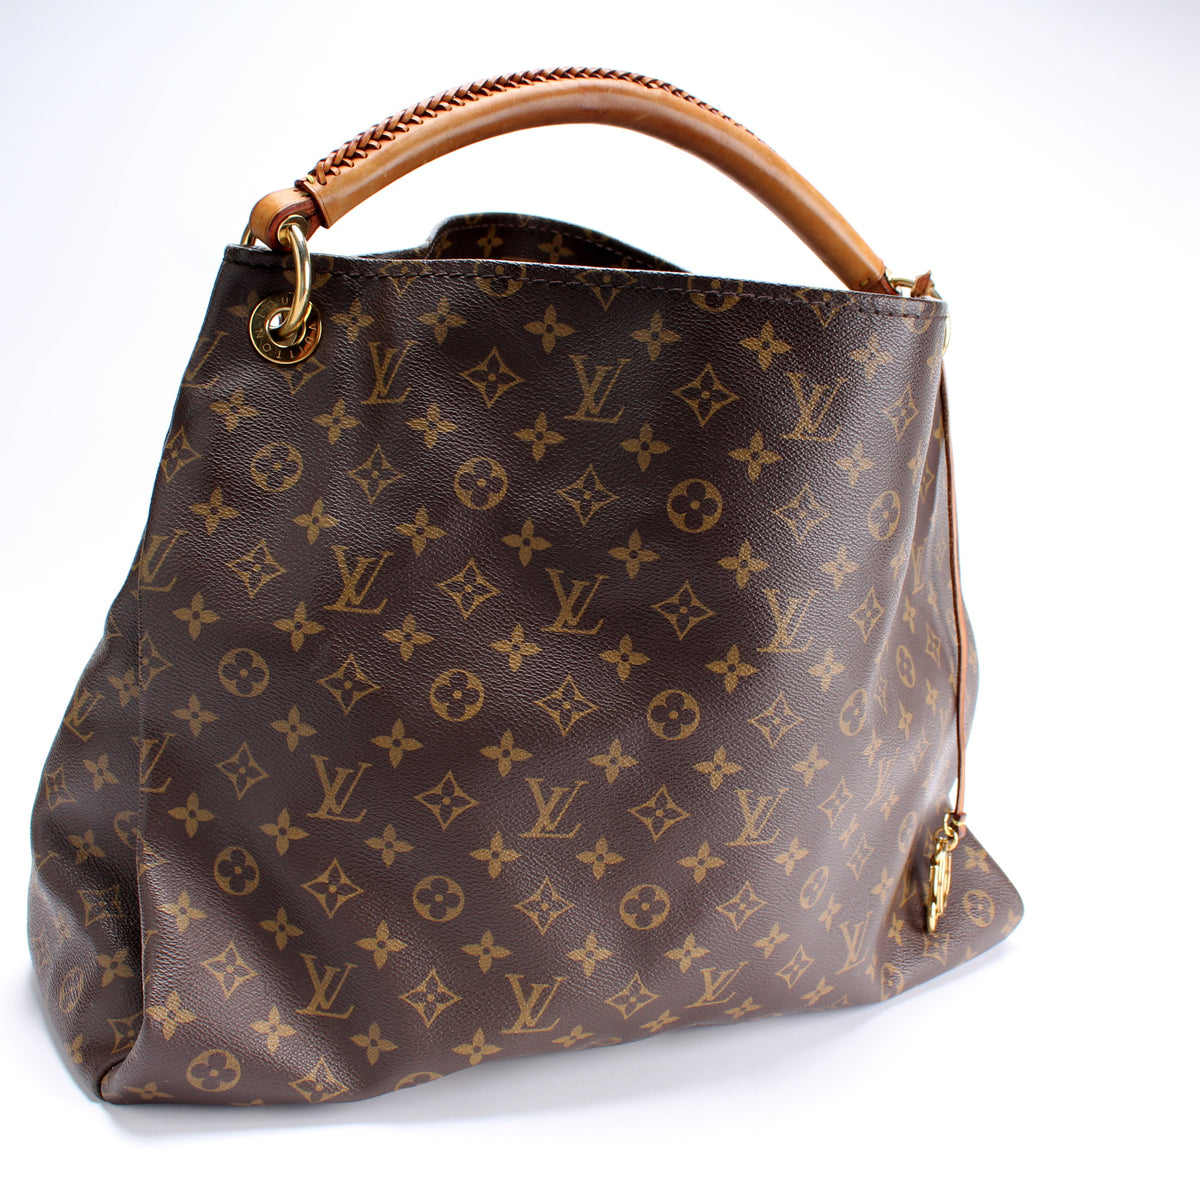 artsy louis vuitton I have this bag and everyone loves it!!